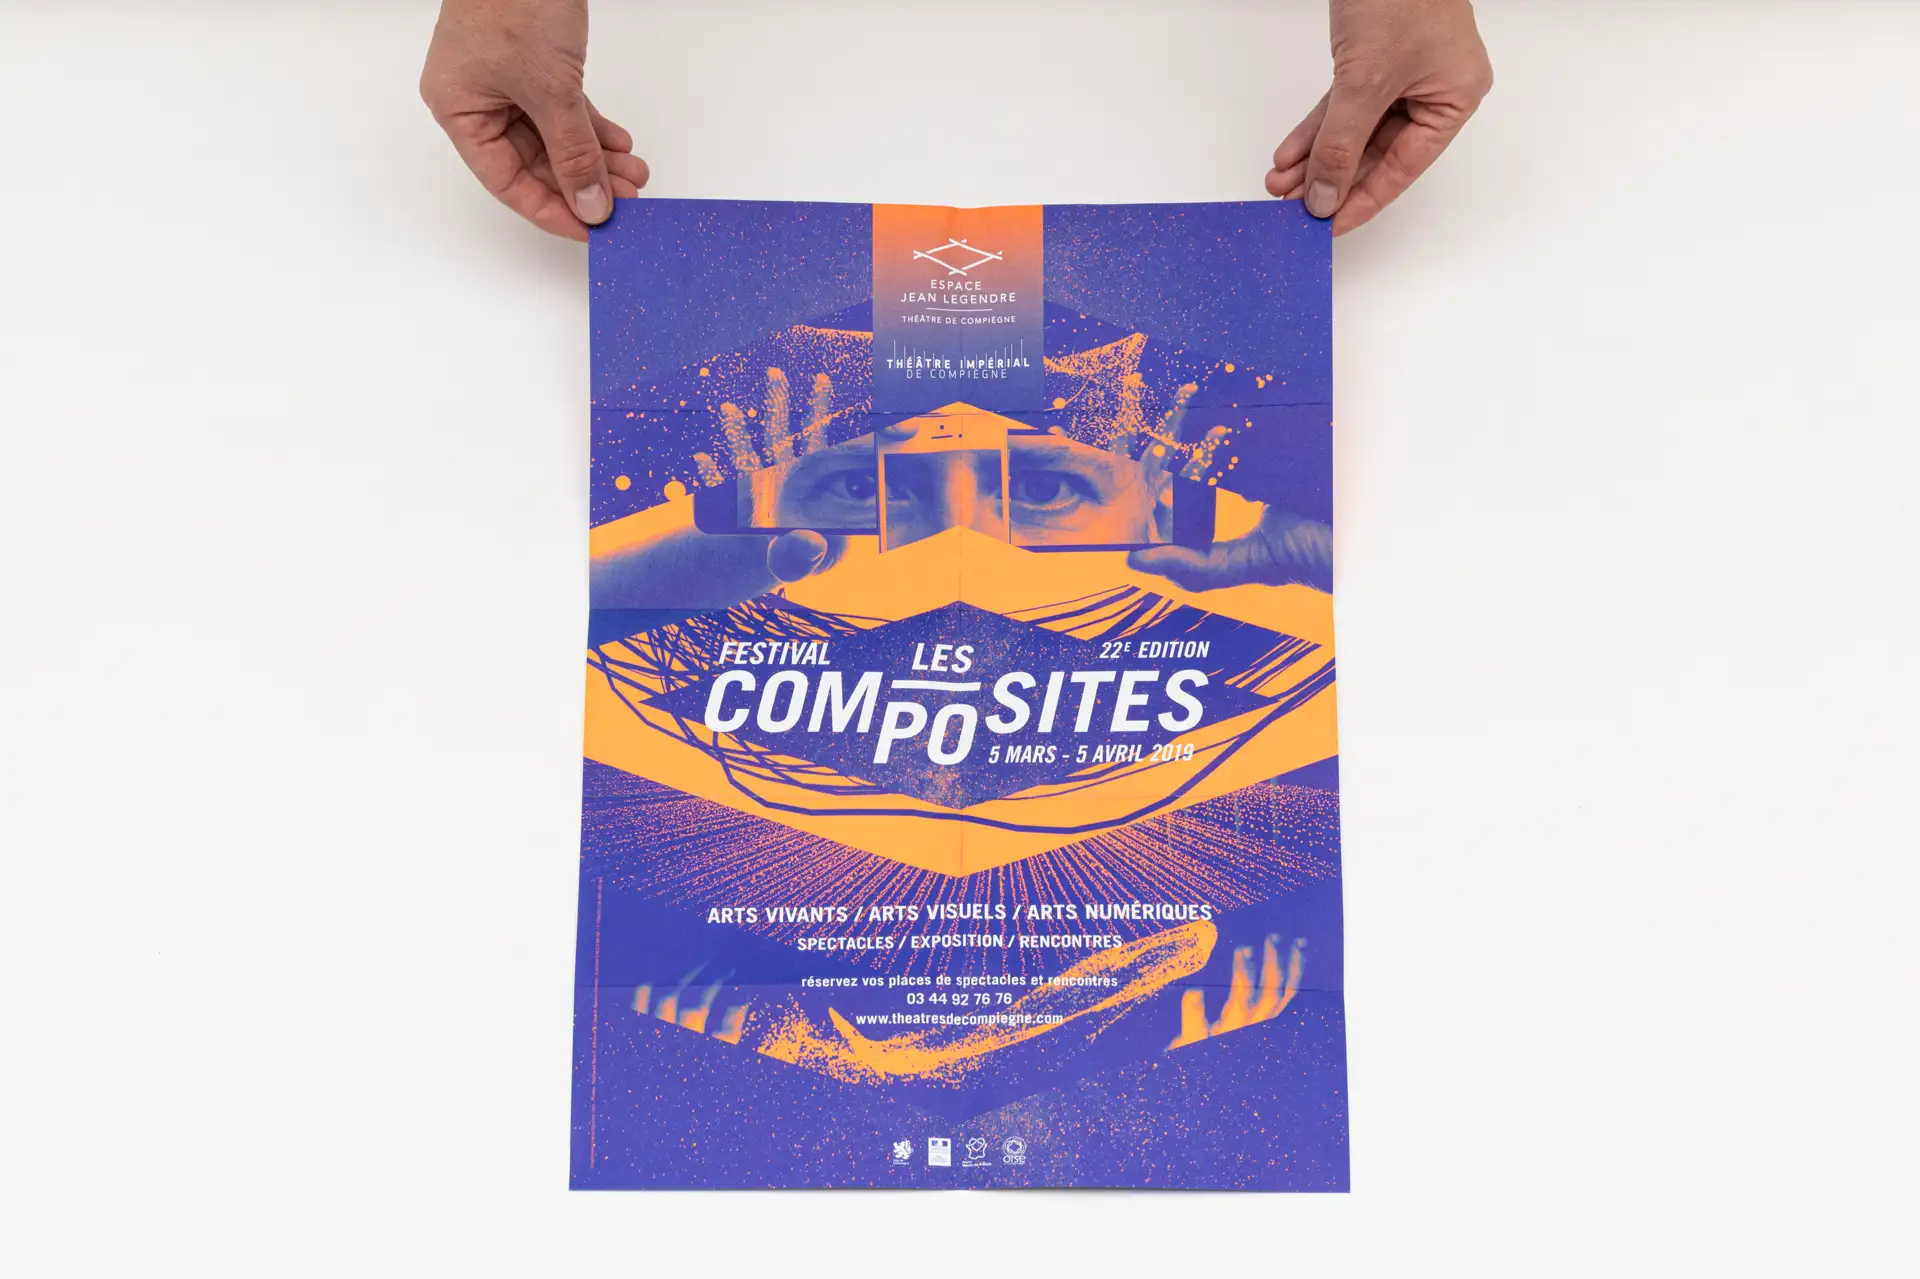 Image presenting the project Festival les Composites